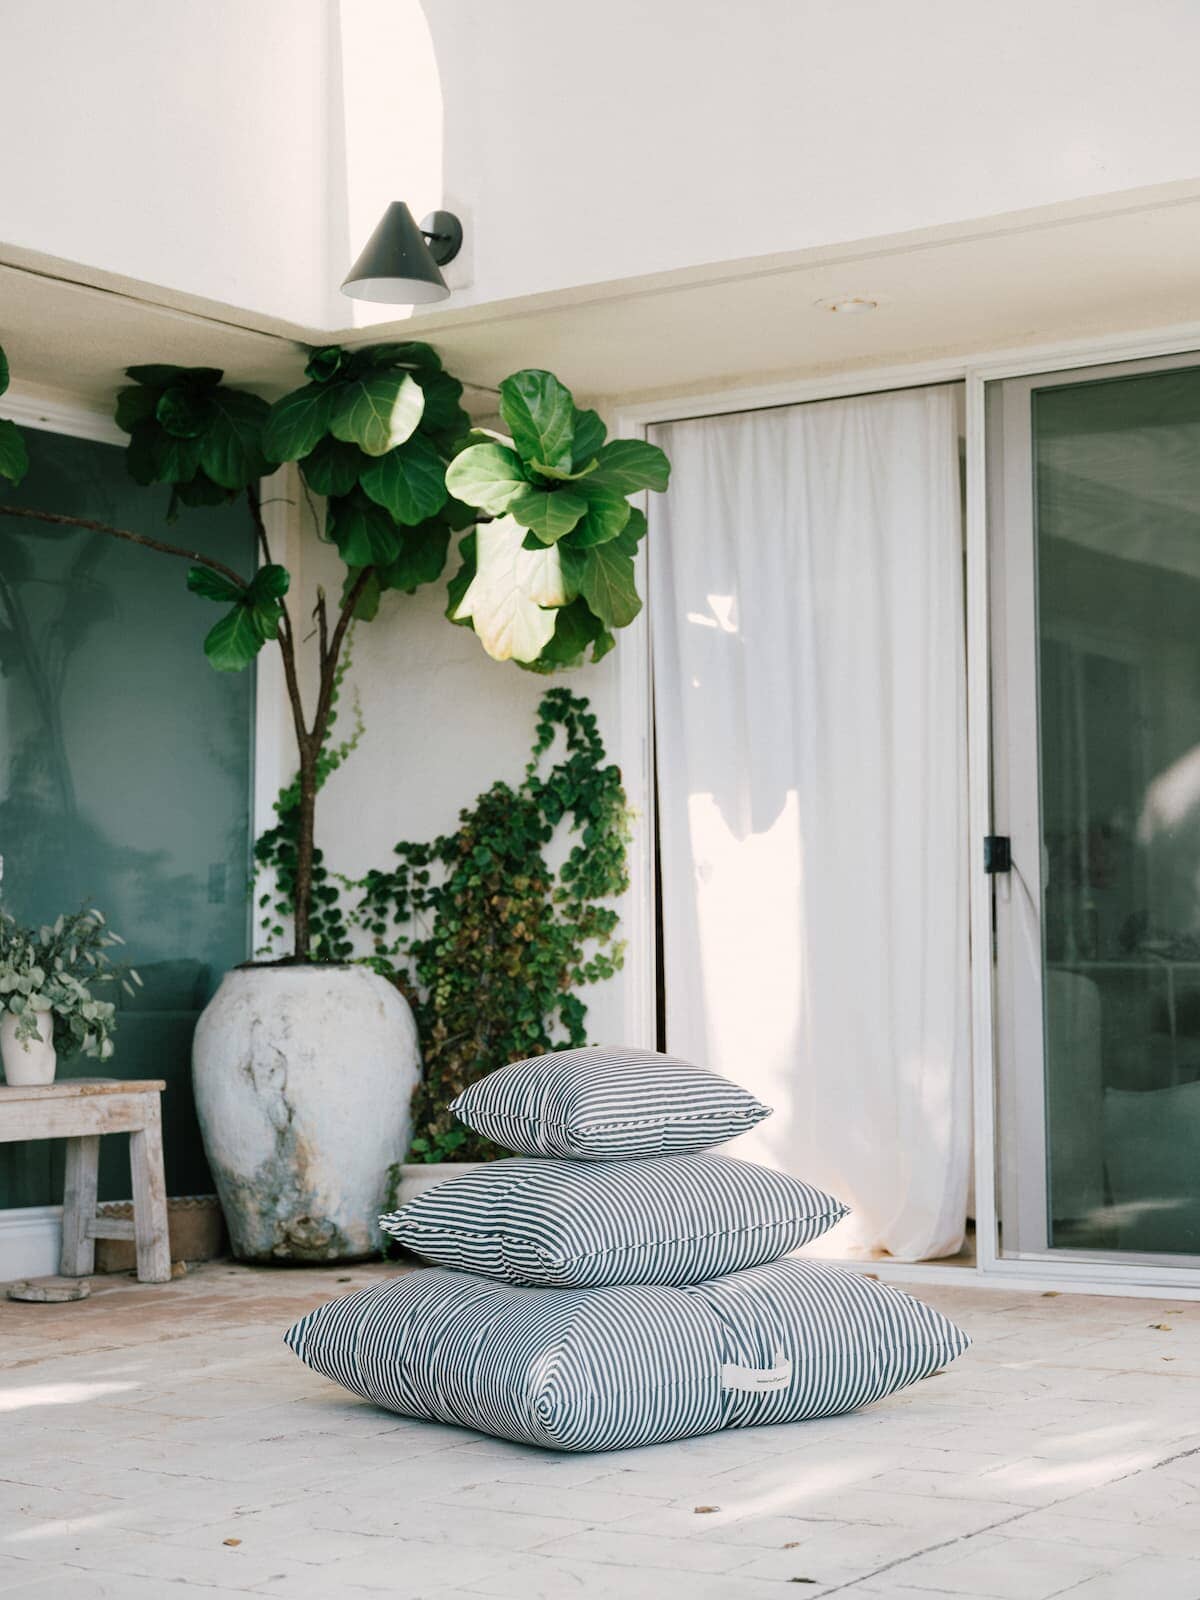 3 outdoor cushions stacked on a patio